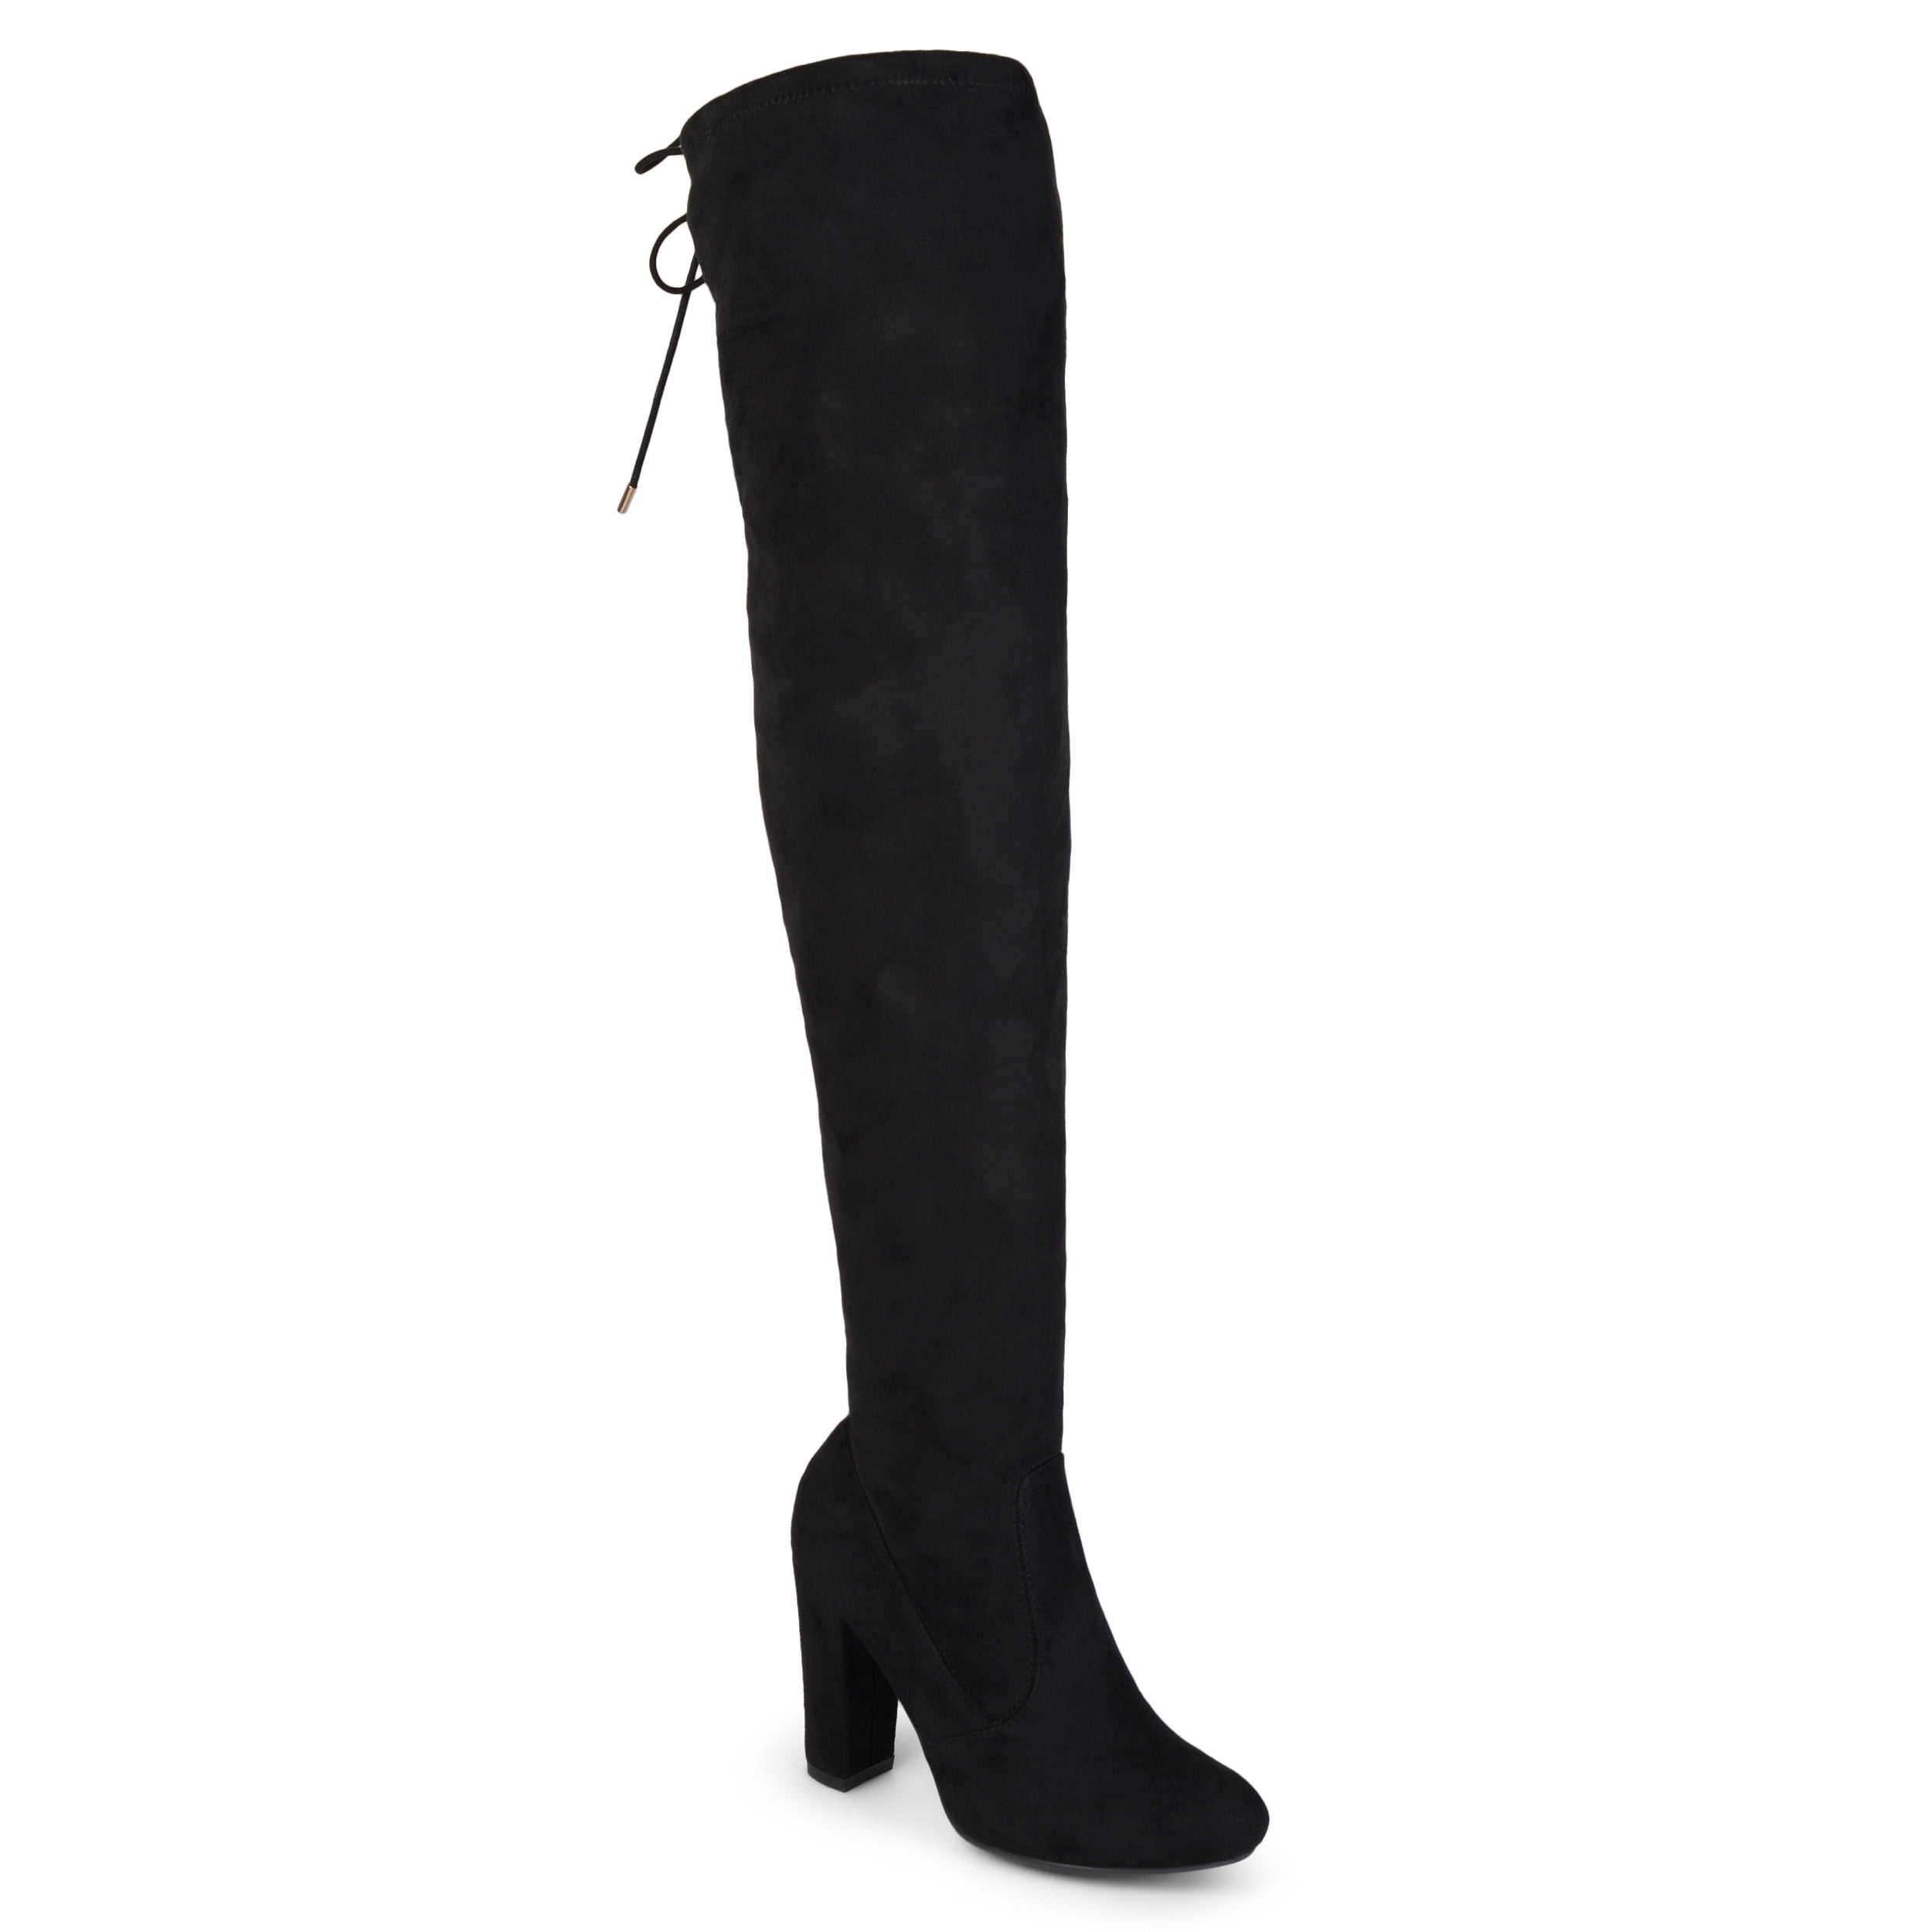 Waterproof Platform Large Size Thick with Round Head High Boots Side Zipper Slip Warm Warm Comfortable Thigh Elastic Boots for Parties FCXBQ High-Heeled Knee Boots Shopping